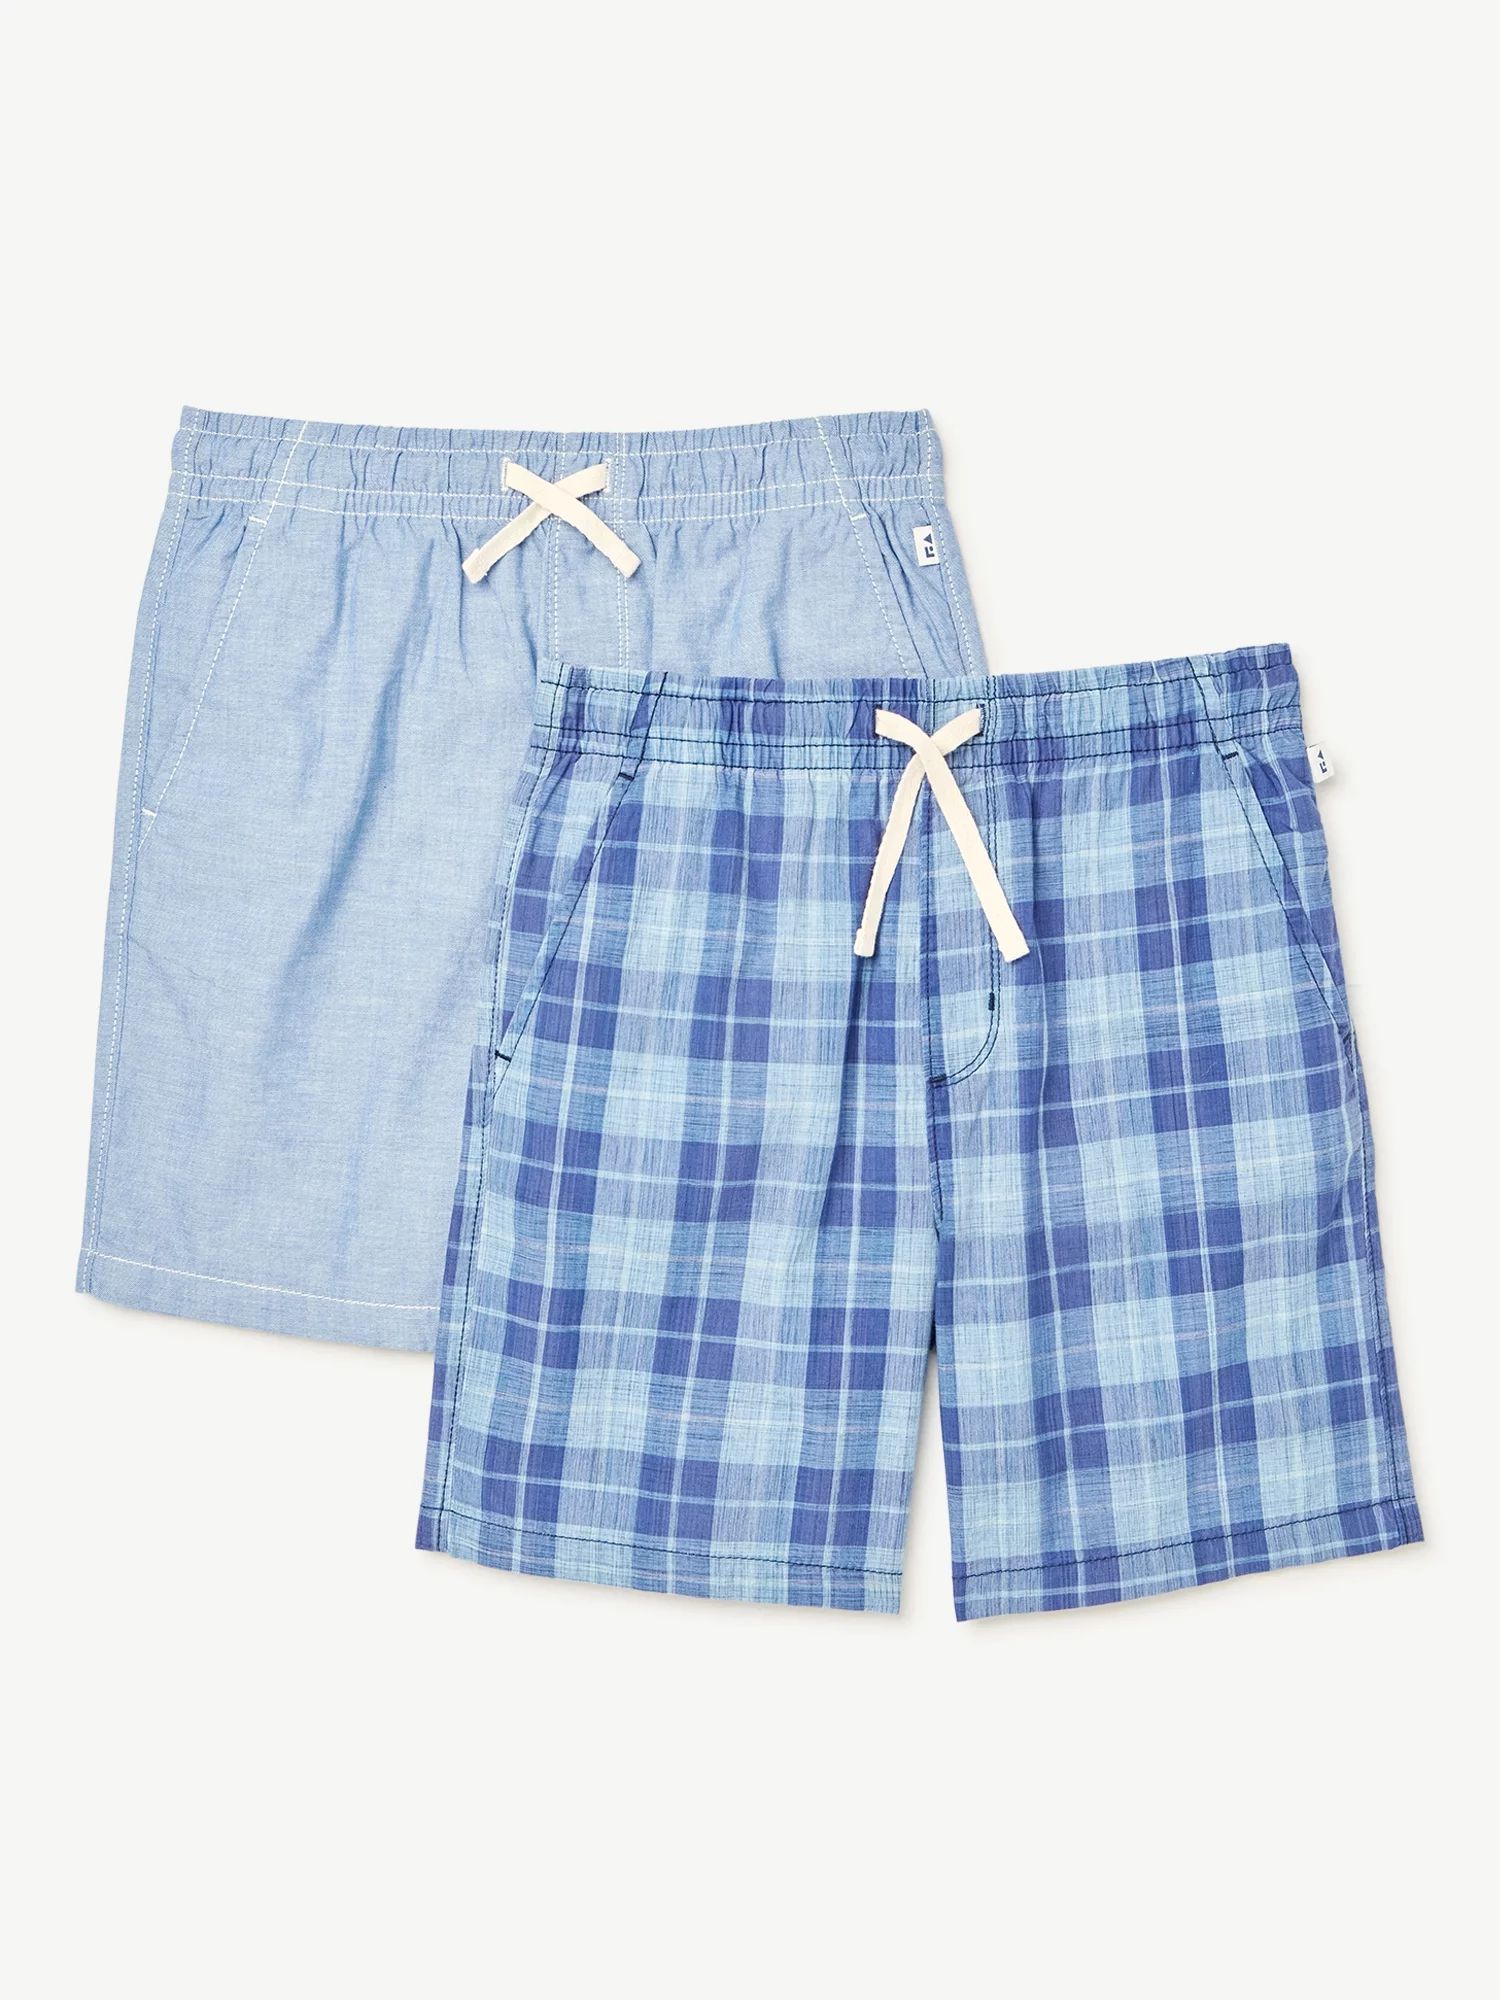 Free Assembly Boys Pull on Dock Shorts, 2-Pack, Sizes 4-18 | Walmart (US)